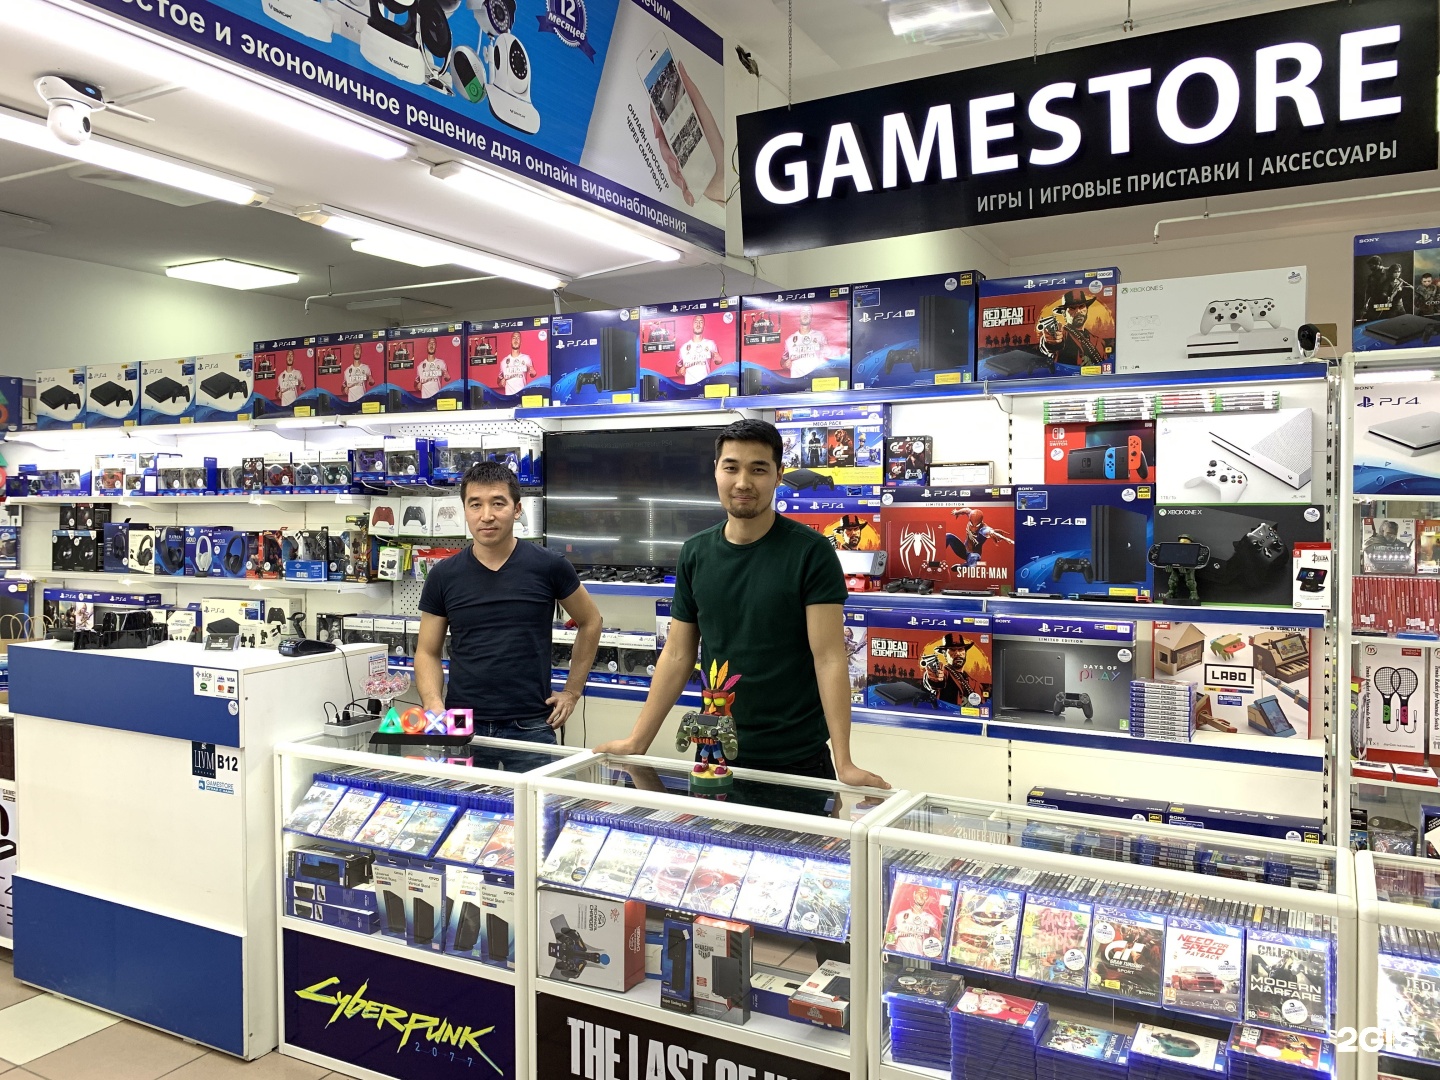 Game on gaming store. Game Store. Гейм стор магазин. Gamestore магазин видеоигр. Магазин gamestore в Екатеринбурге.